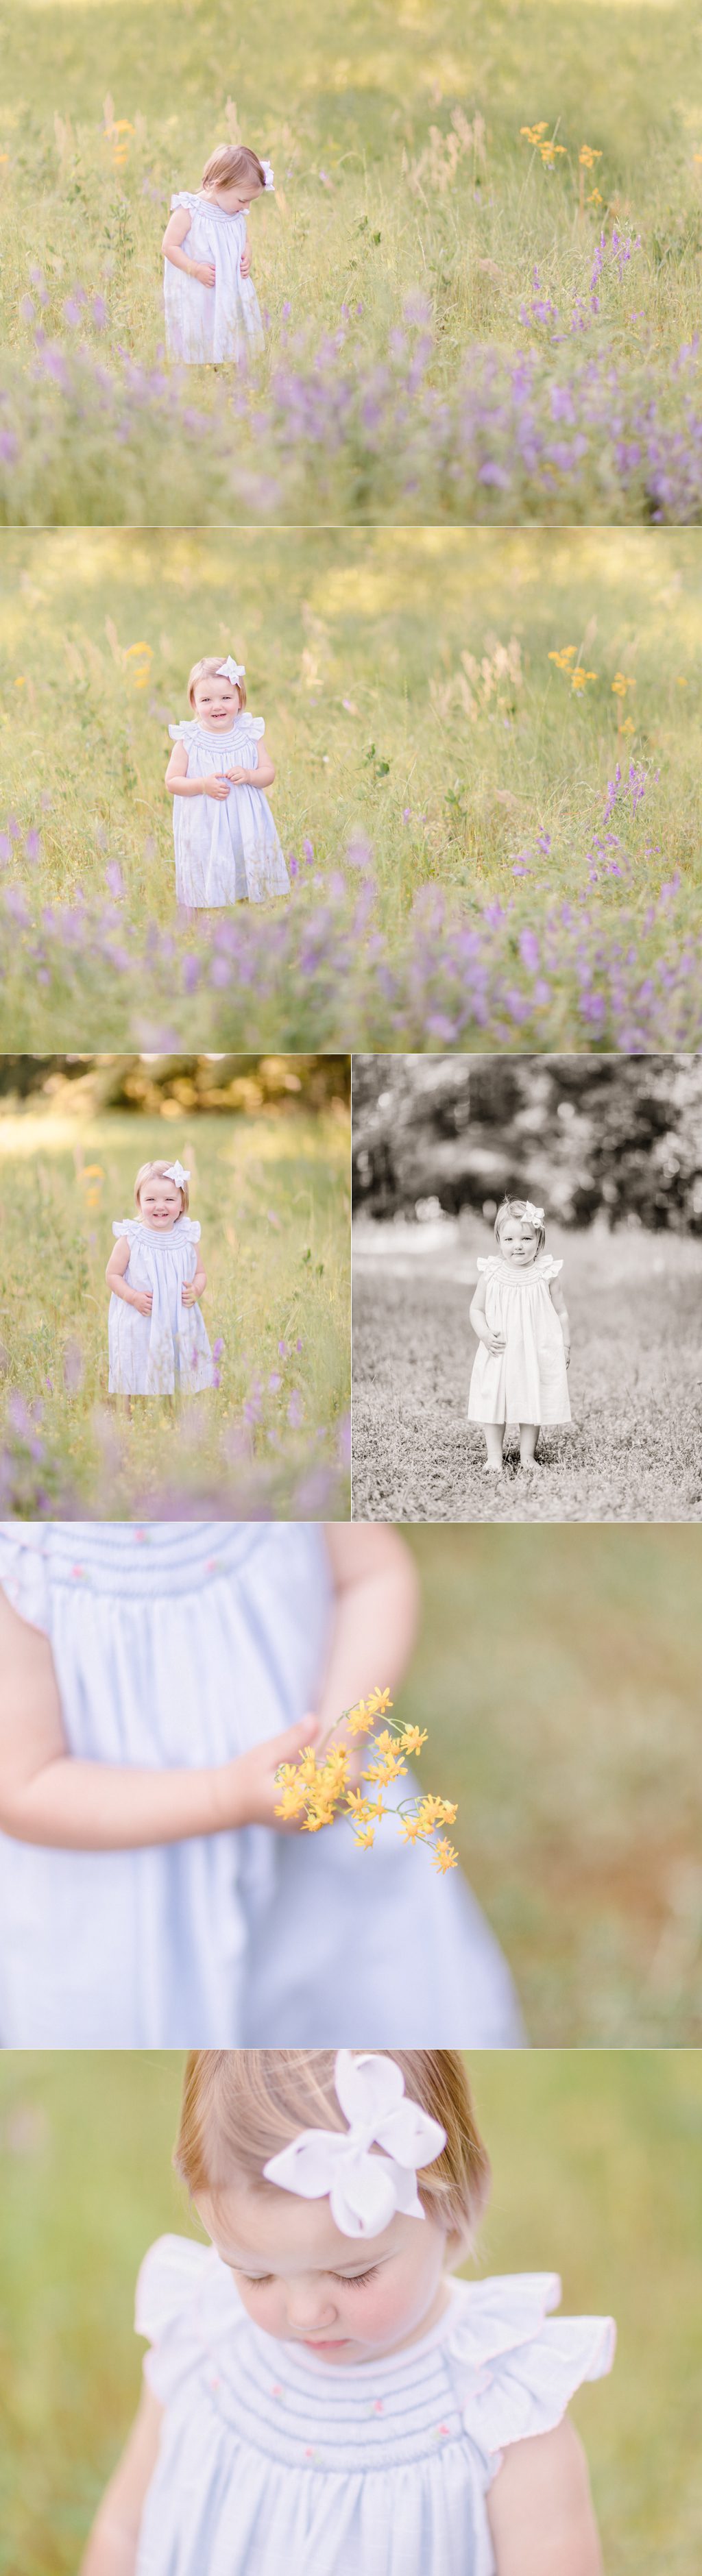 Summer portraits of a little girl in a country field in Oconee County, GA.